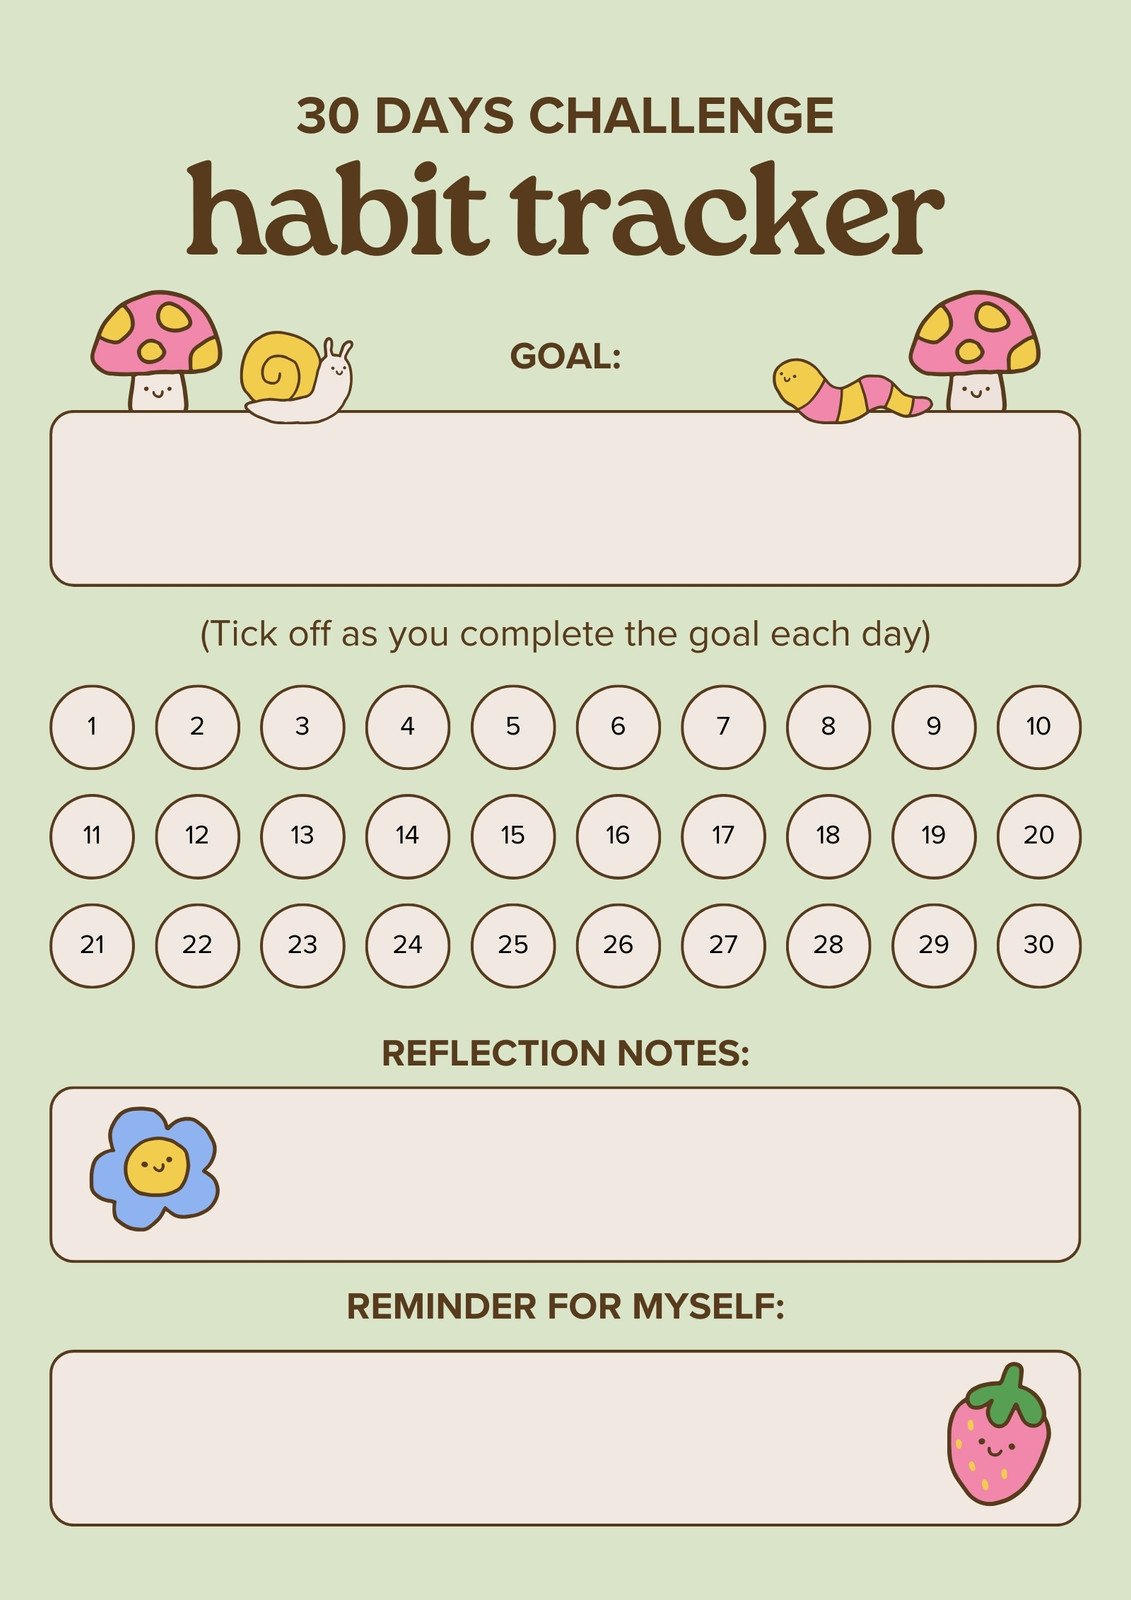 Doodle Cute Kawaii Pastel Weight Scale Reminder Tracker Planner